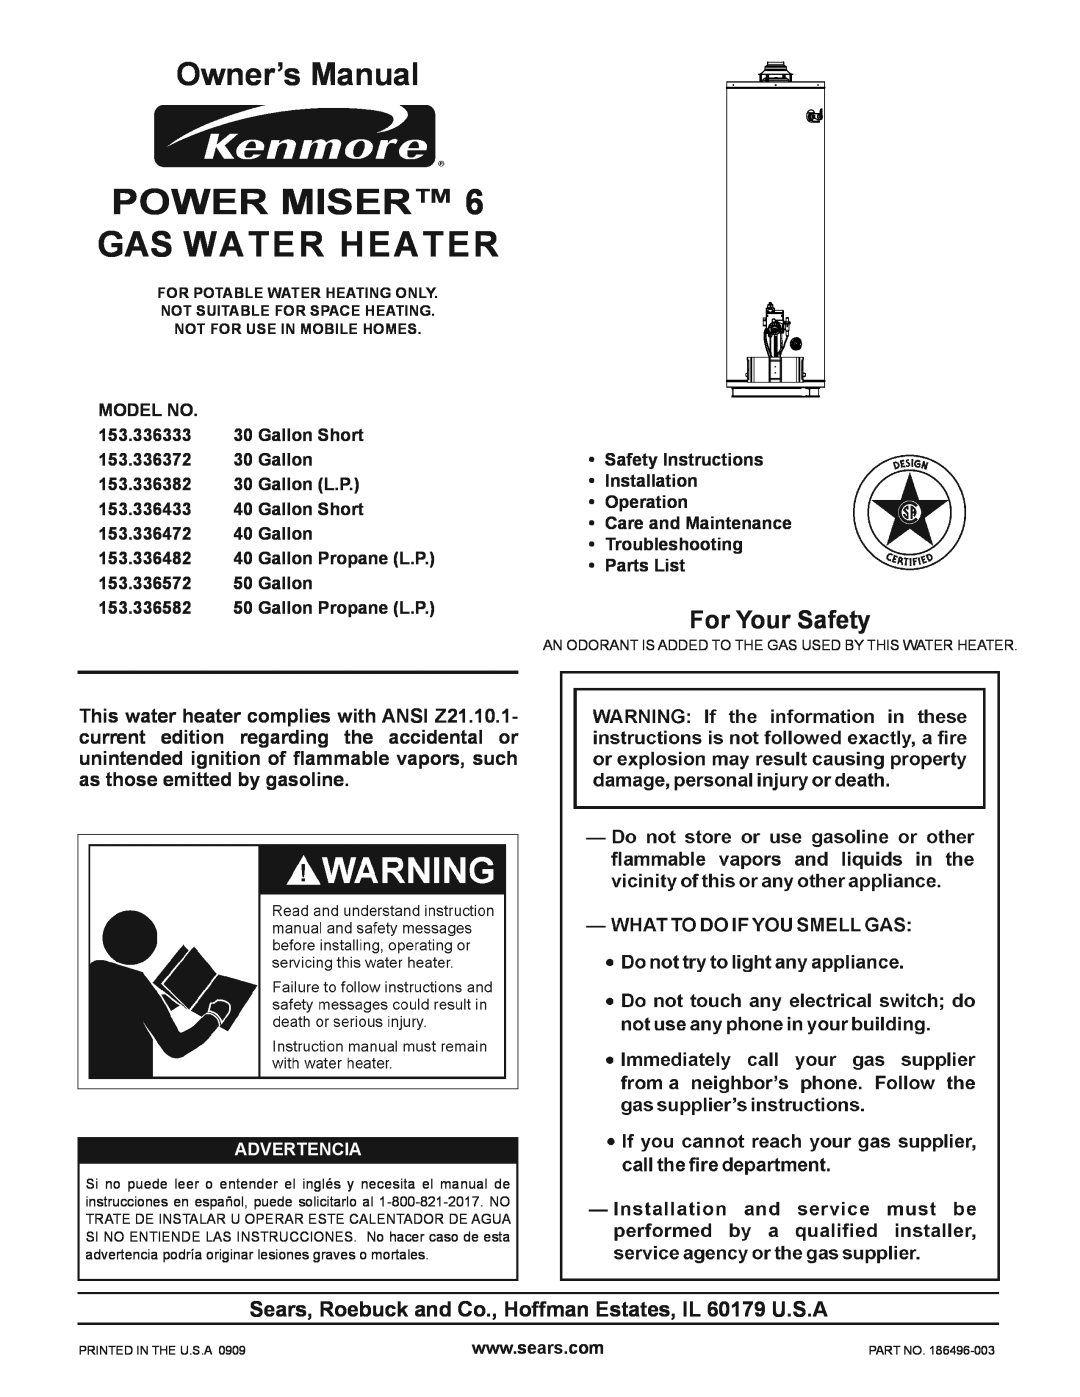 Kenmore 153.336333, 153.336372, 153.336382 owner manual Power Miser Gas Water Heater, For Your Safety, Advertencia 